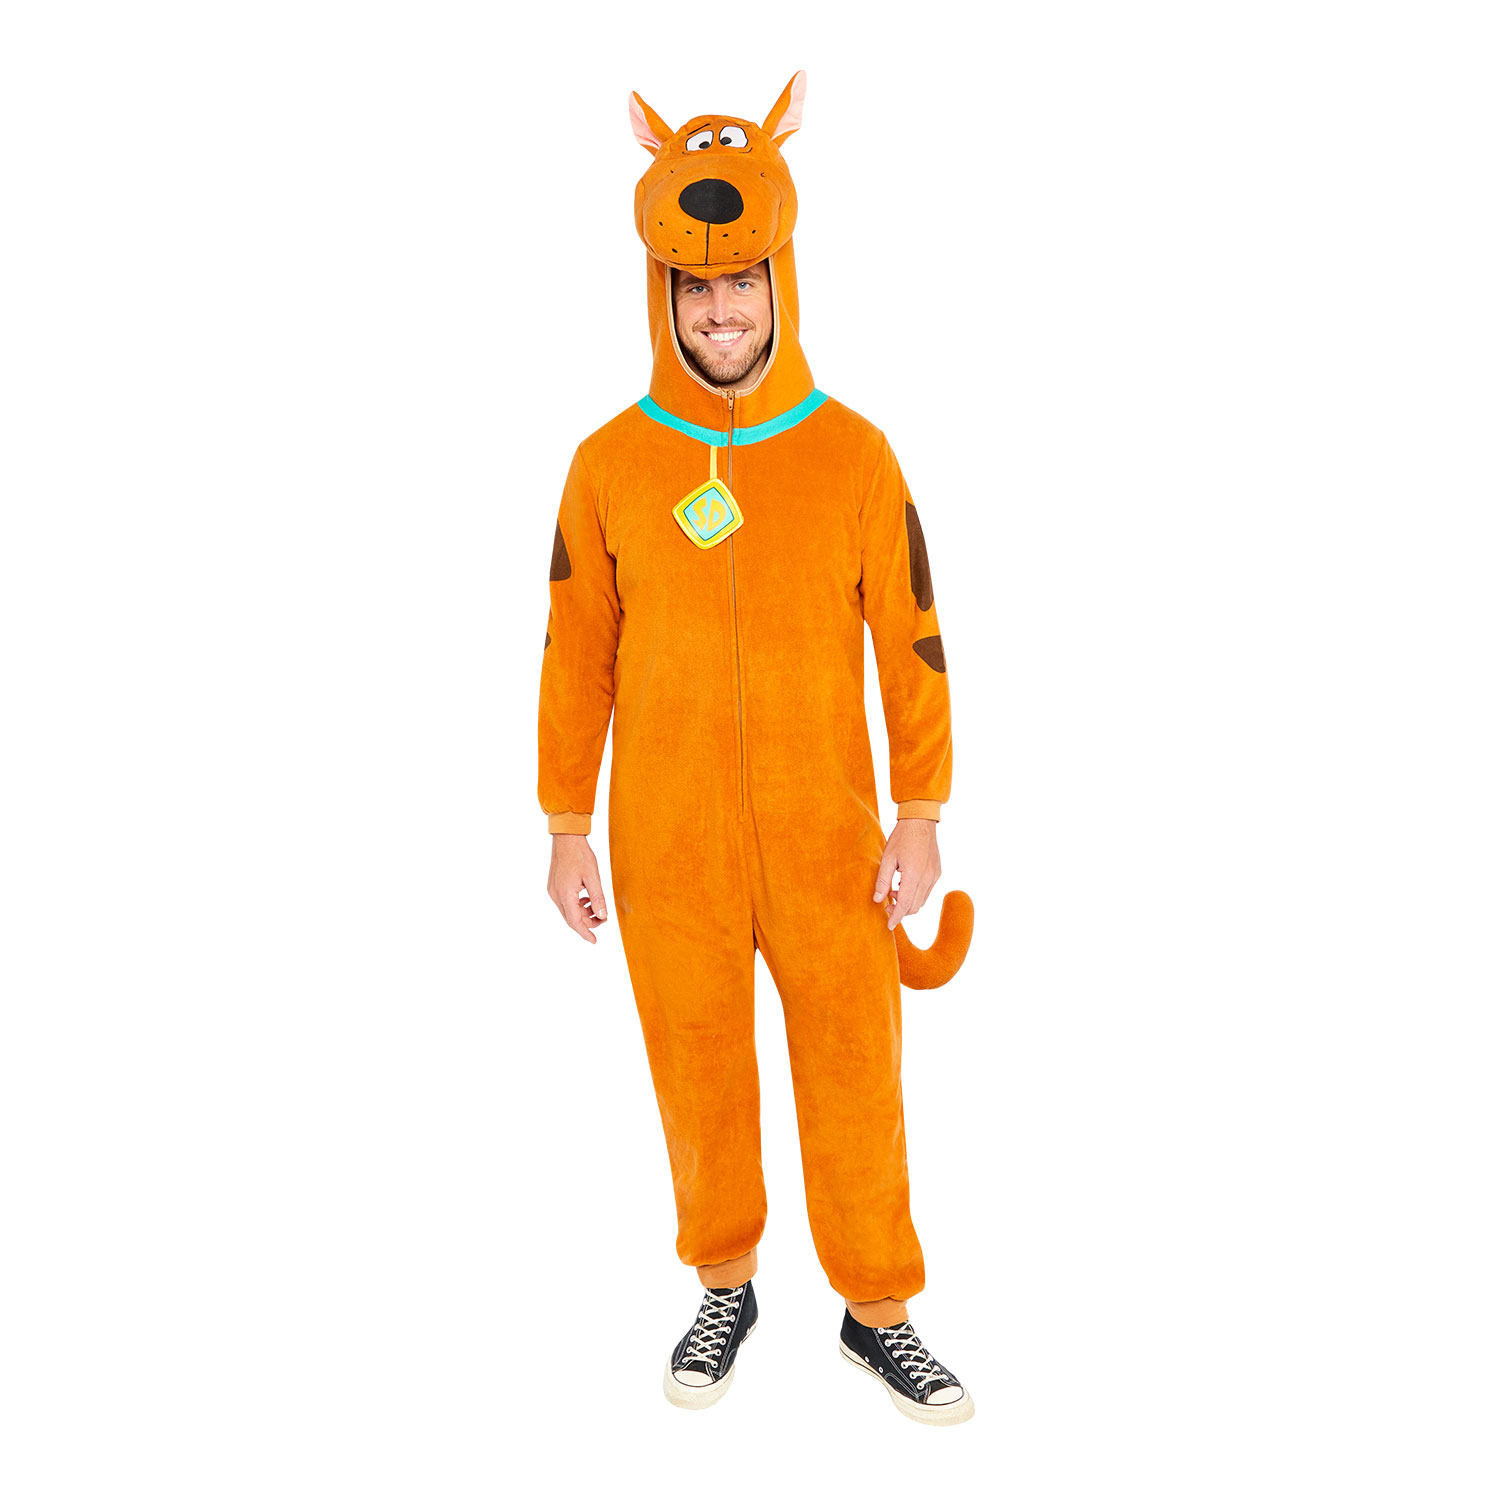 Scooby Doo Costume - Size Large - 1 PC : Amscan International